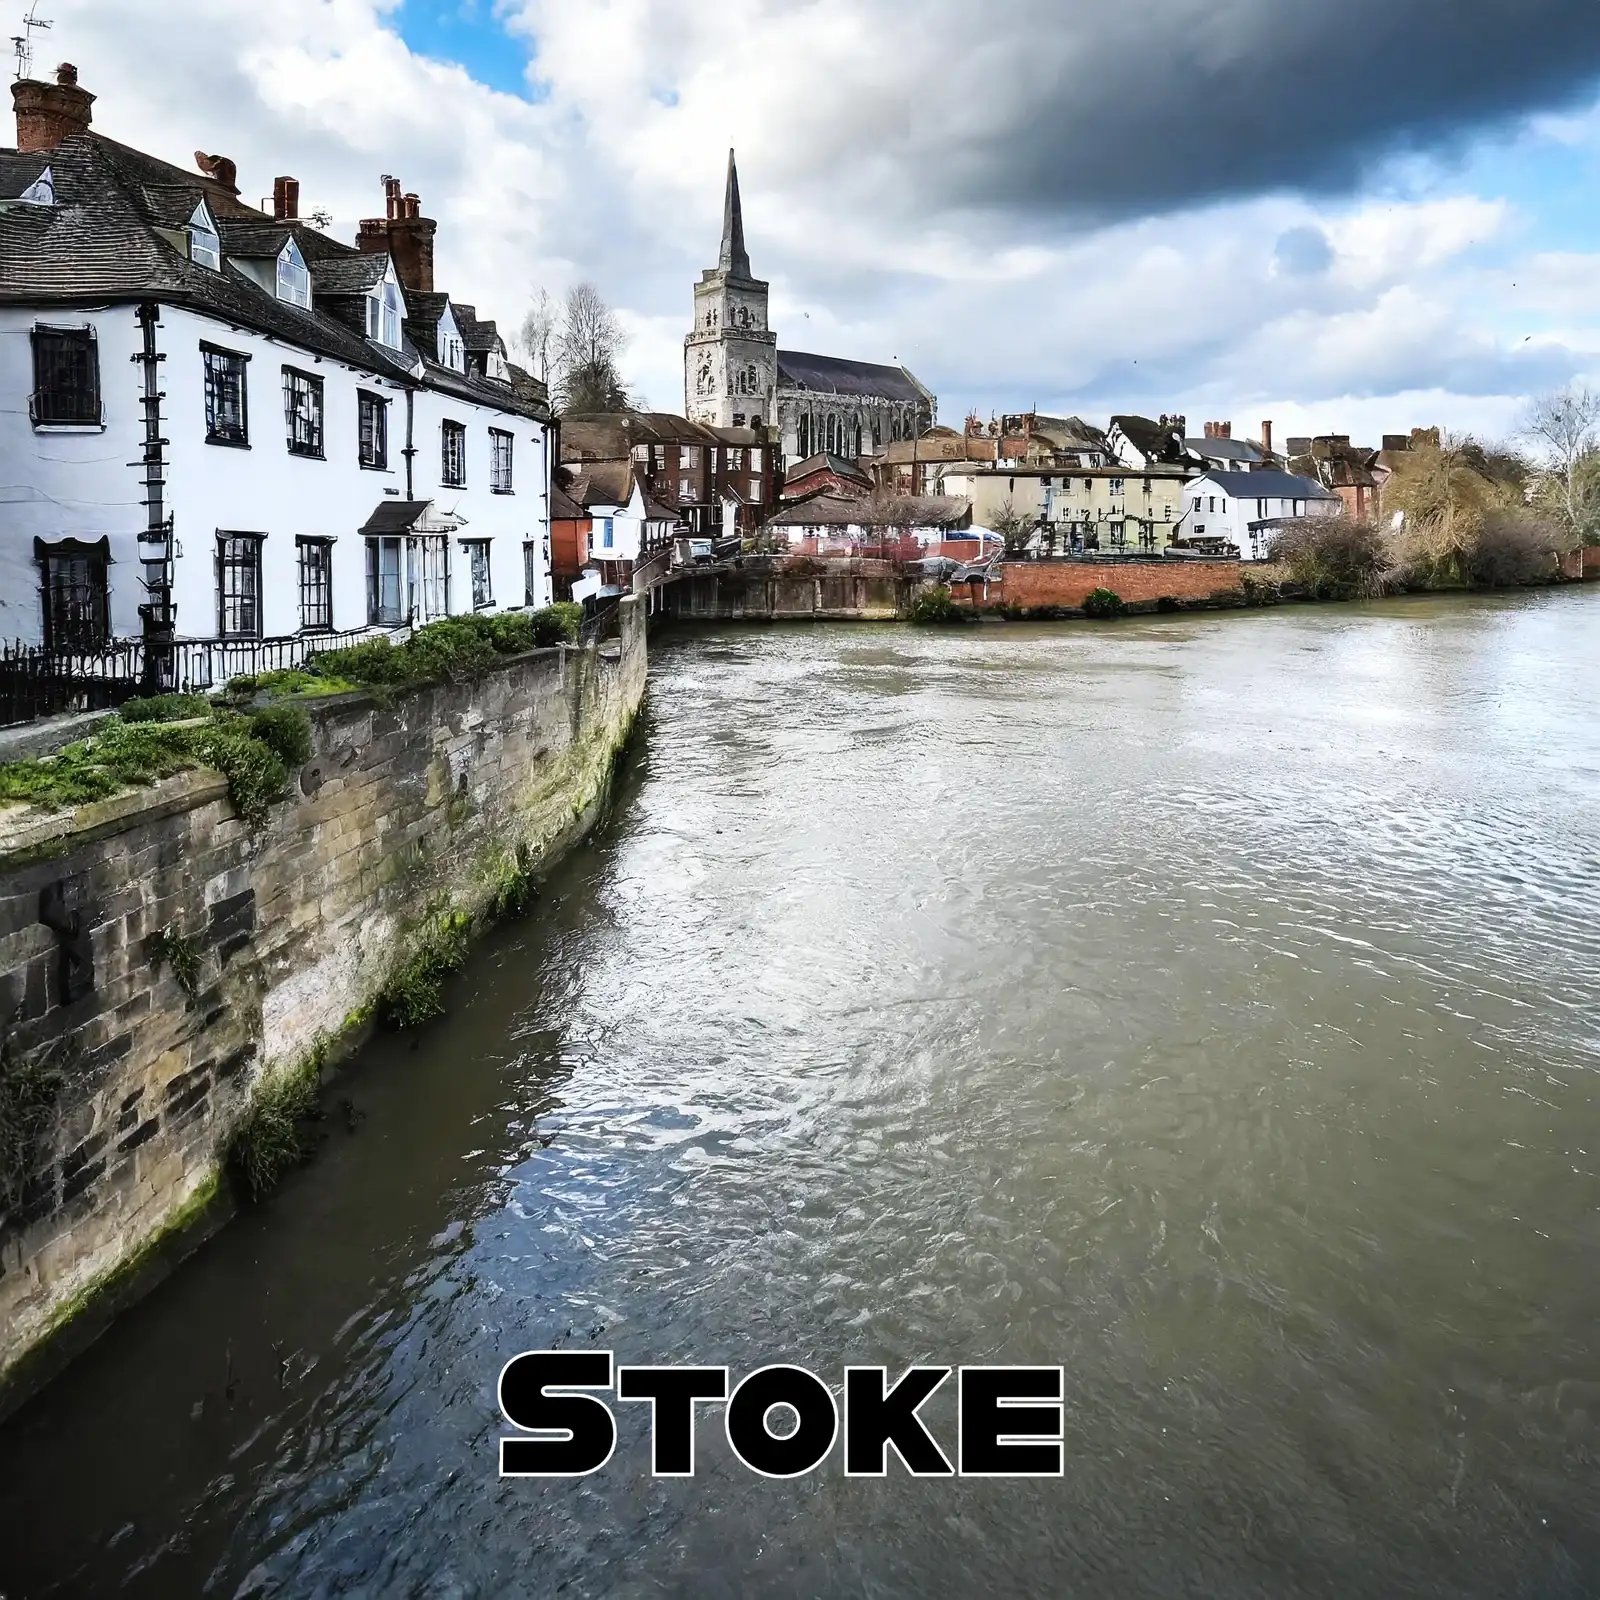 Historic buildings along a river with a church spire, labeled "Stoke."